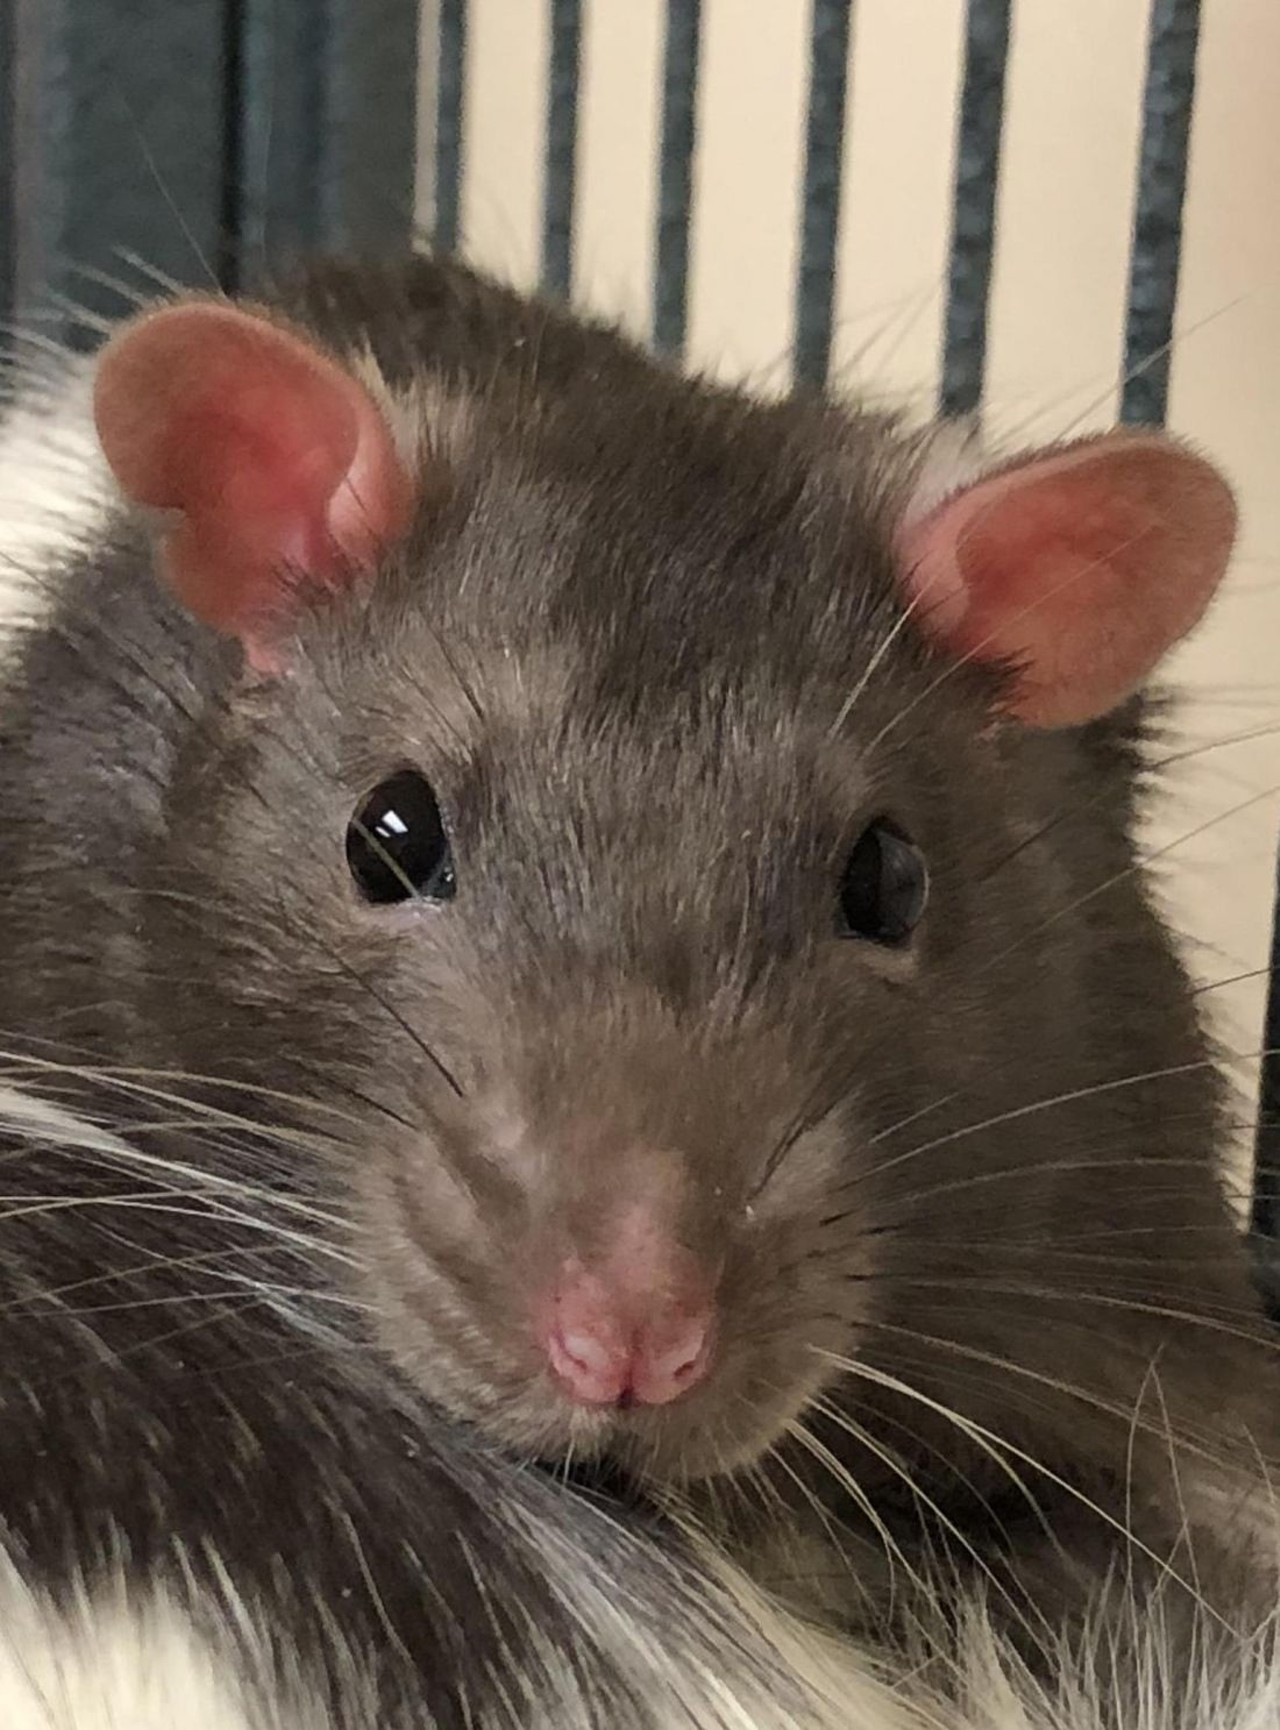 NAME:  Alfredo Linguini  and  Auguste
GENDER: Male
BREED: Purebred Rat
AGE: 1 year
SPECIAL CONSIDERATIONS: Bonded pair, meaning they must be adopted together
REASON I CAME TO MHS: Homeless in Livonia
LOCATION: Mackey Center for Animal Care in Detroit
ID NUMBER: 867492 and 867488, respectively